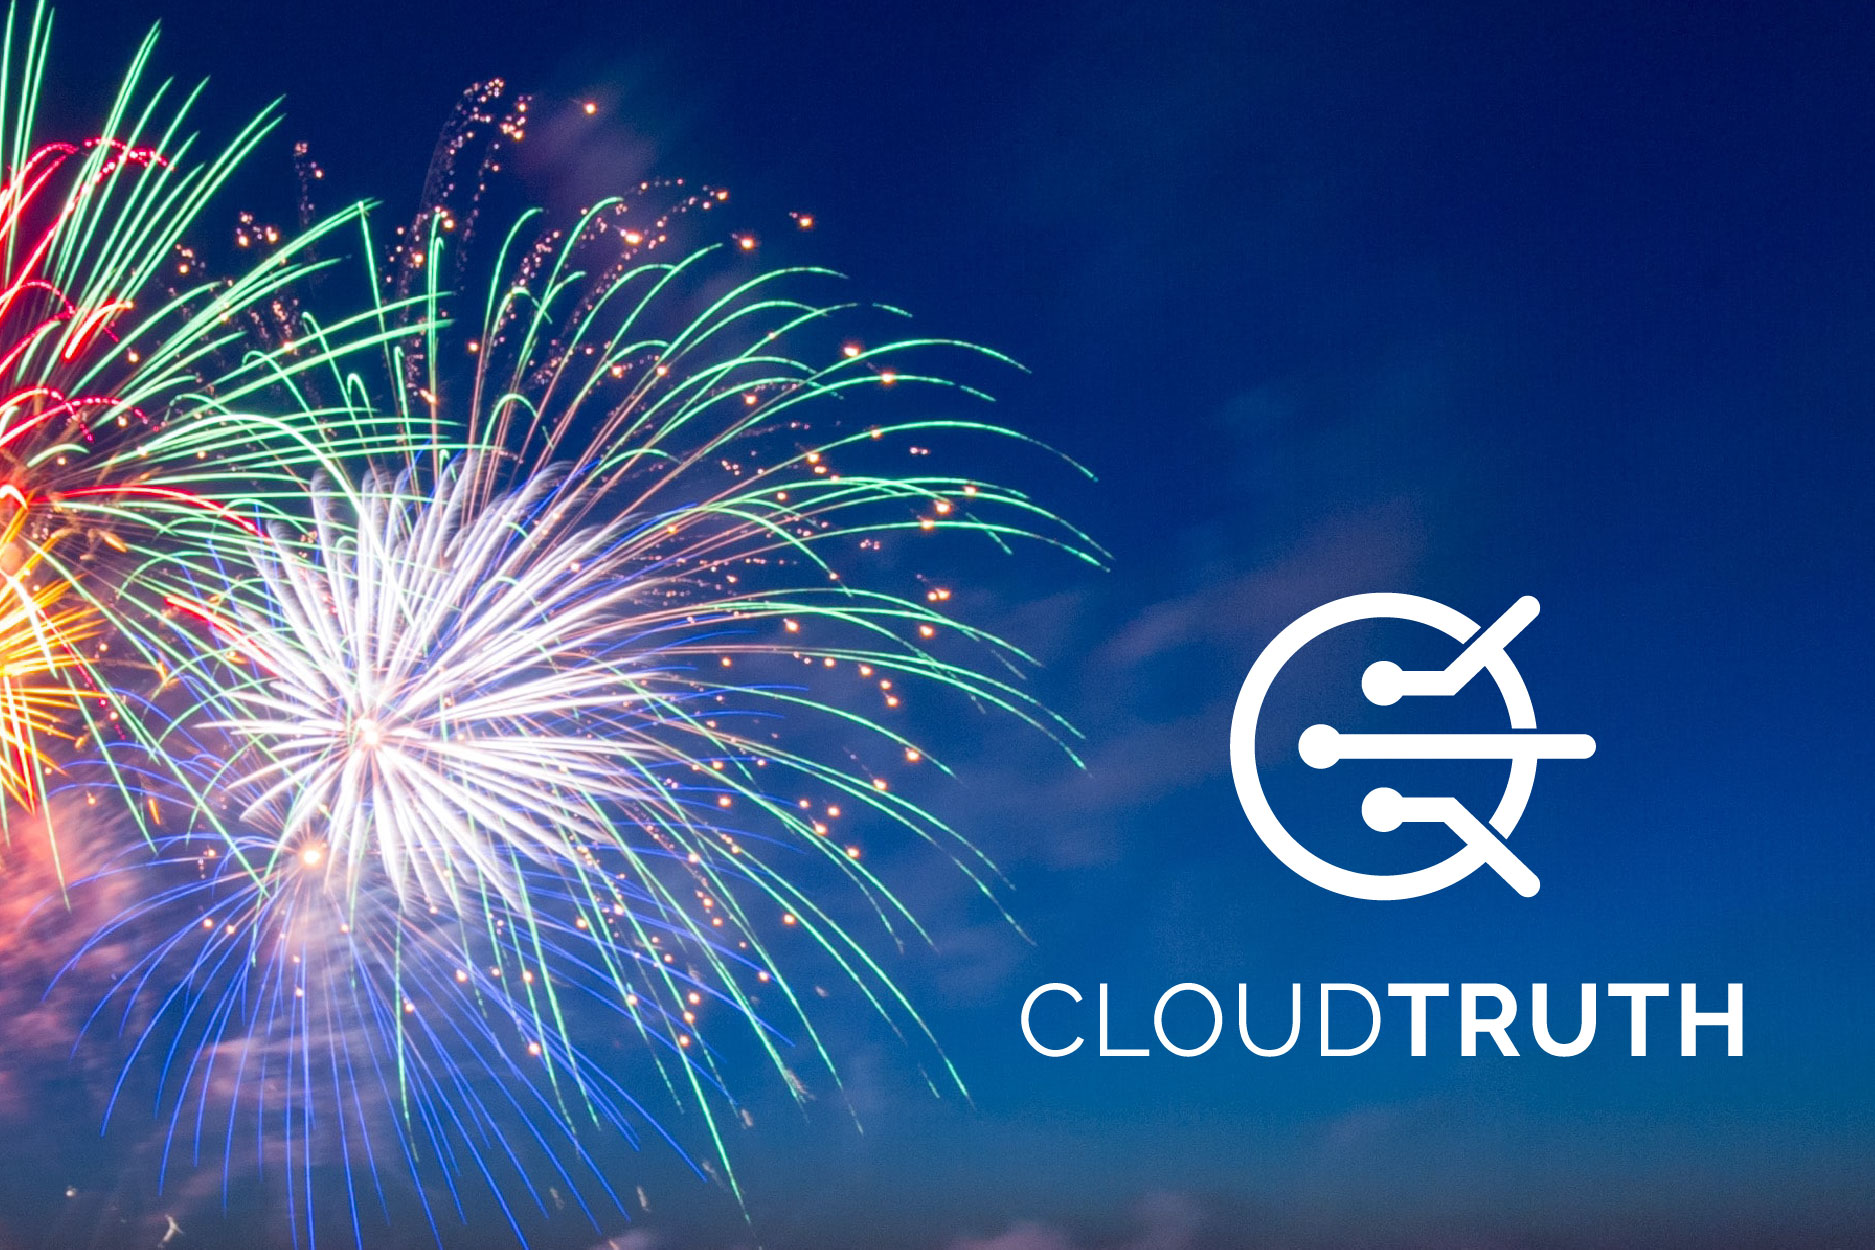 CloudTruth Raises $5.25 Million To Solve Cloud Configuration Issues For Software Developers And CloudOps Teams